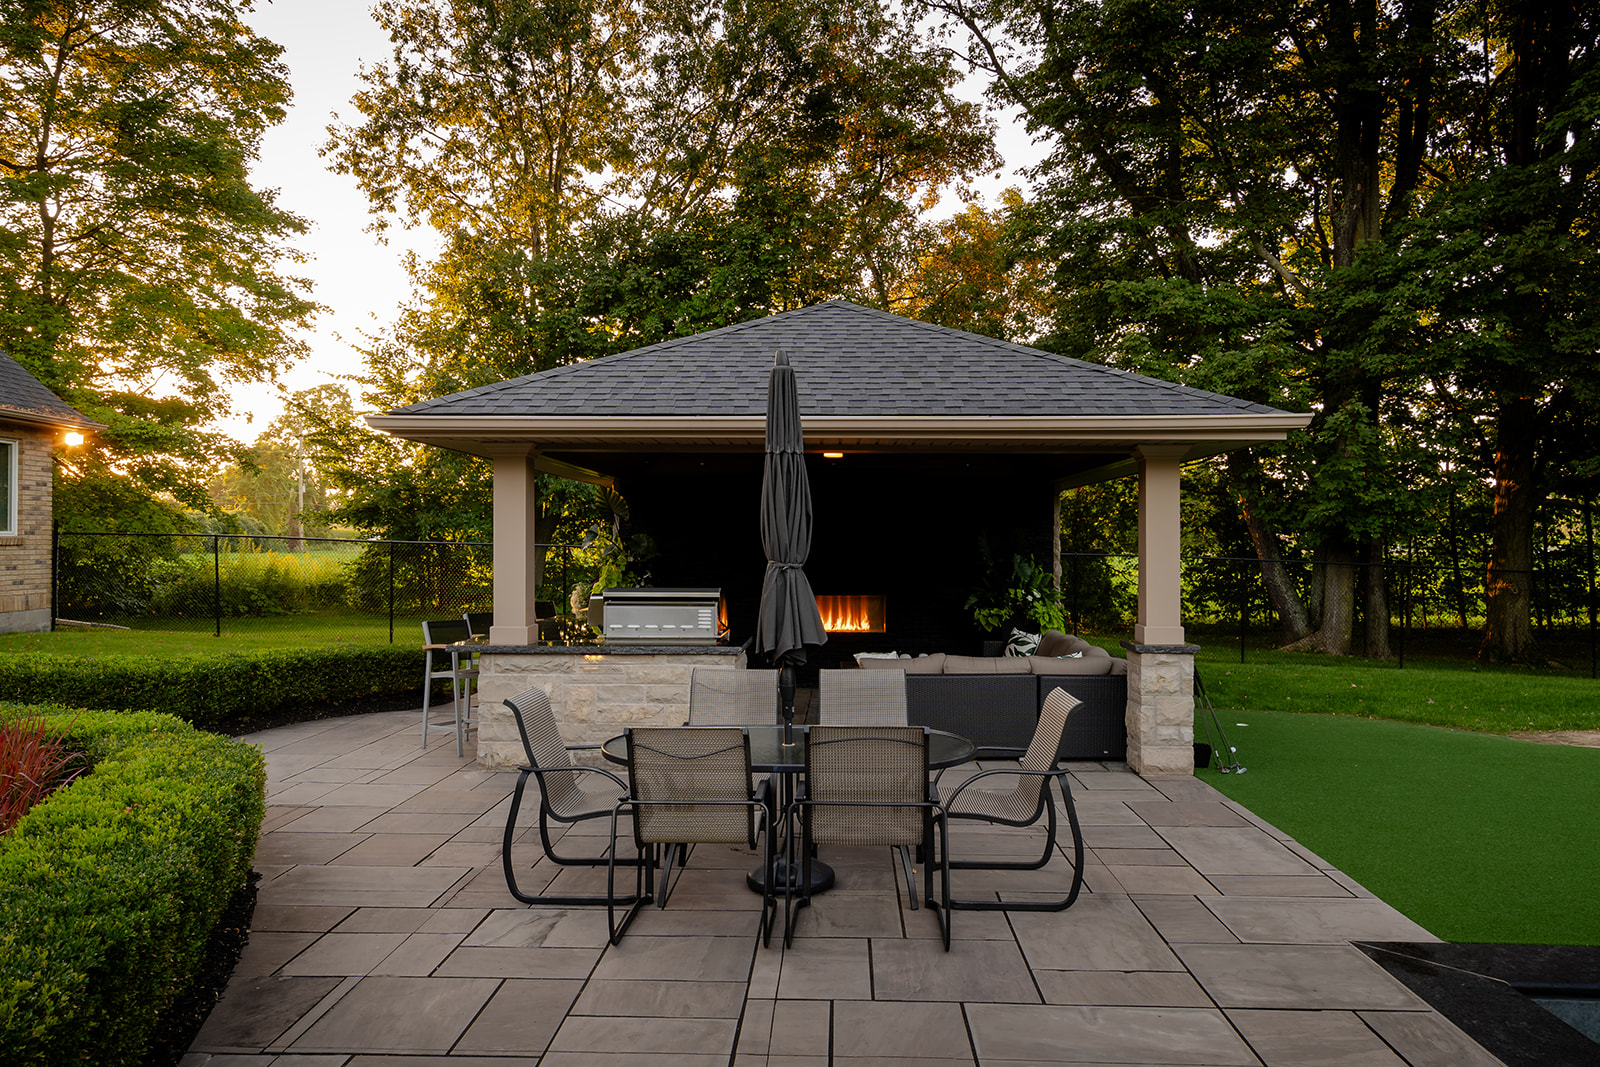 An outdoor patio set in front of the gazebo.